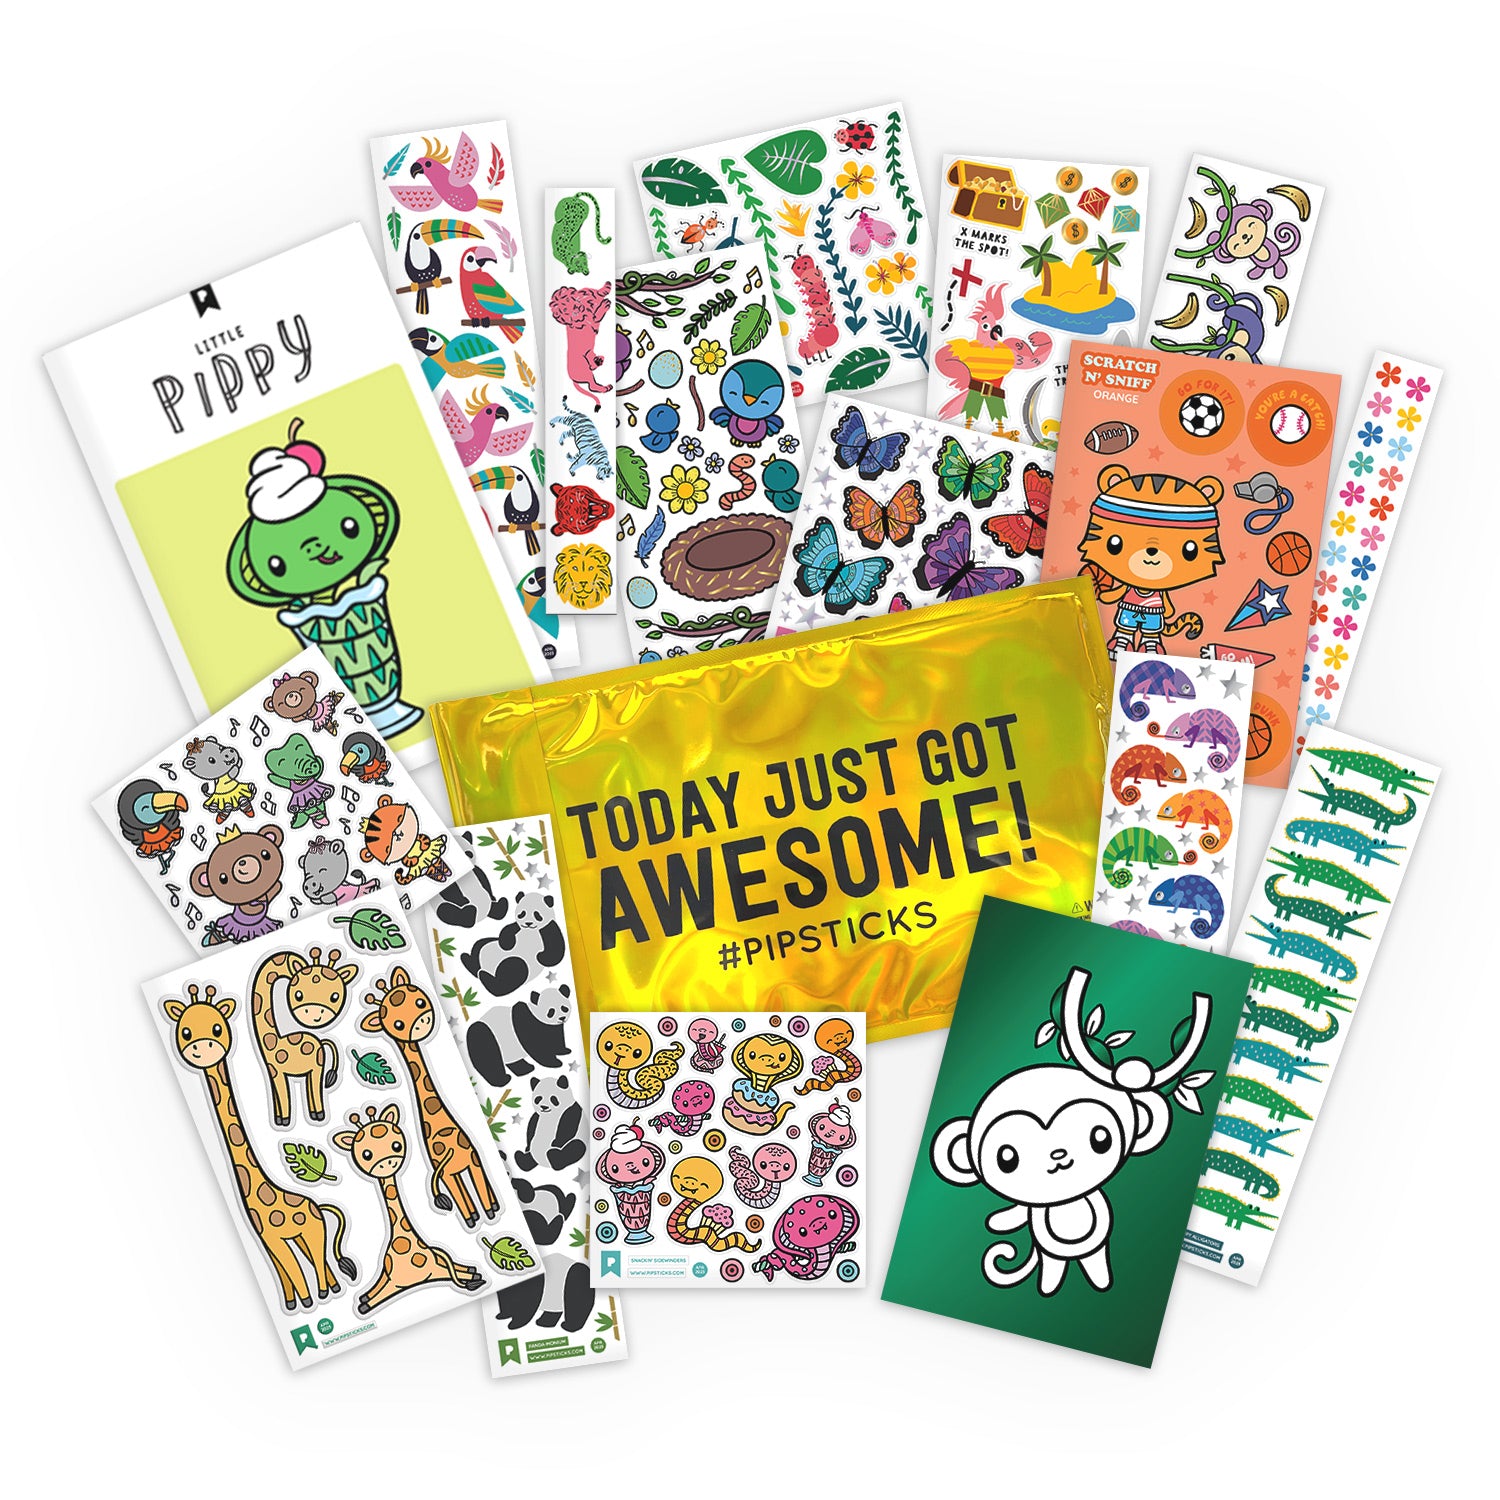 I Heart You Kids Sticker Pack by Pipsticks | Fun & Whimsical Heart Themed  Sticker Designs for Kids | Large Pack with 15 Sheets of Stickers